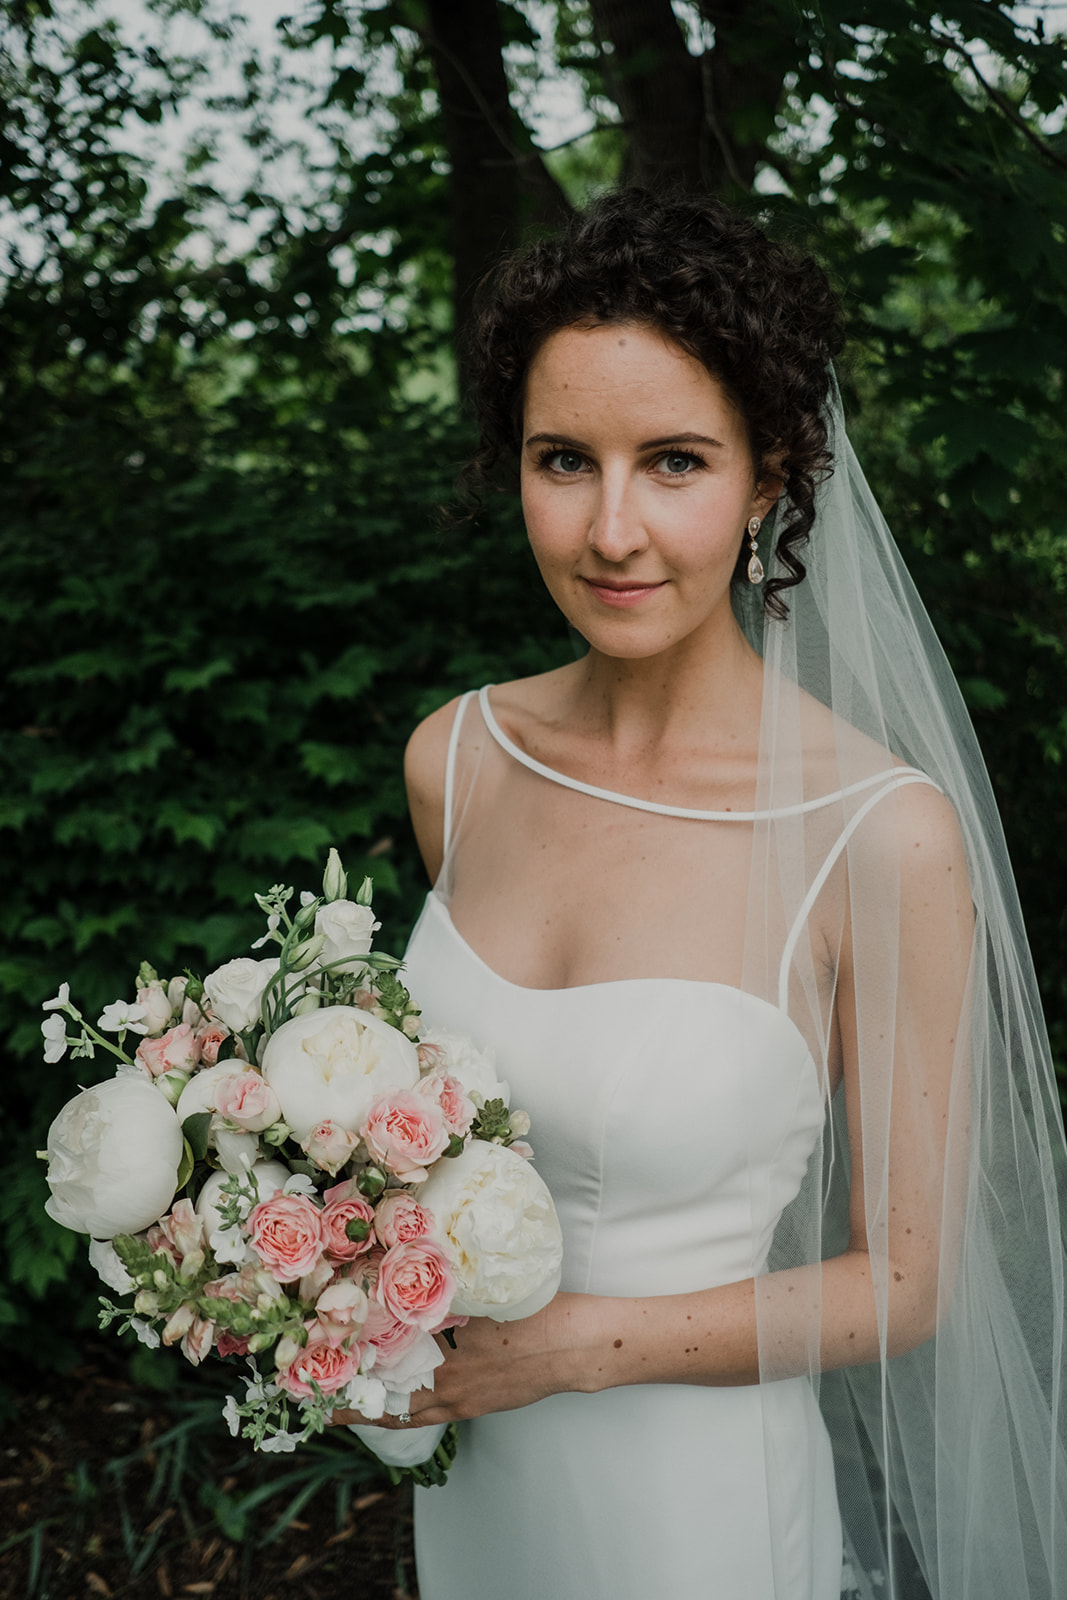  A bride holds a bouquet of pink and white and green florals before her outdoor wedding ceremony at Blue Hill Farm in Waterford, VA.